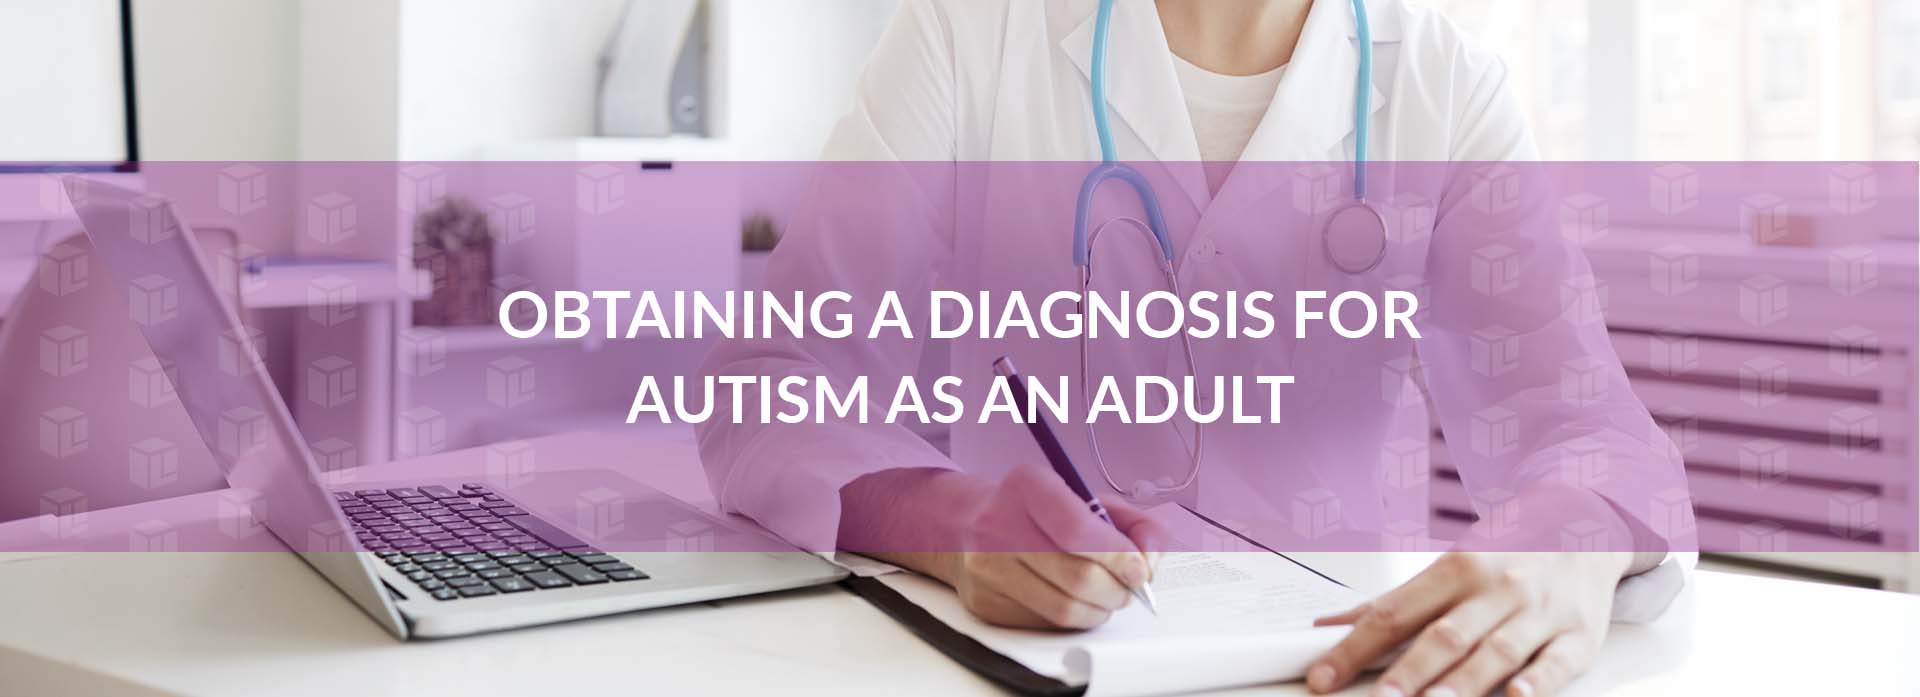 Obtaining A Diagnosis For Autism As An Adult